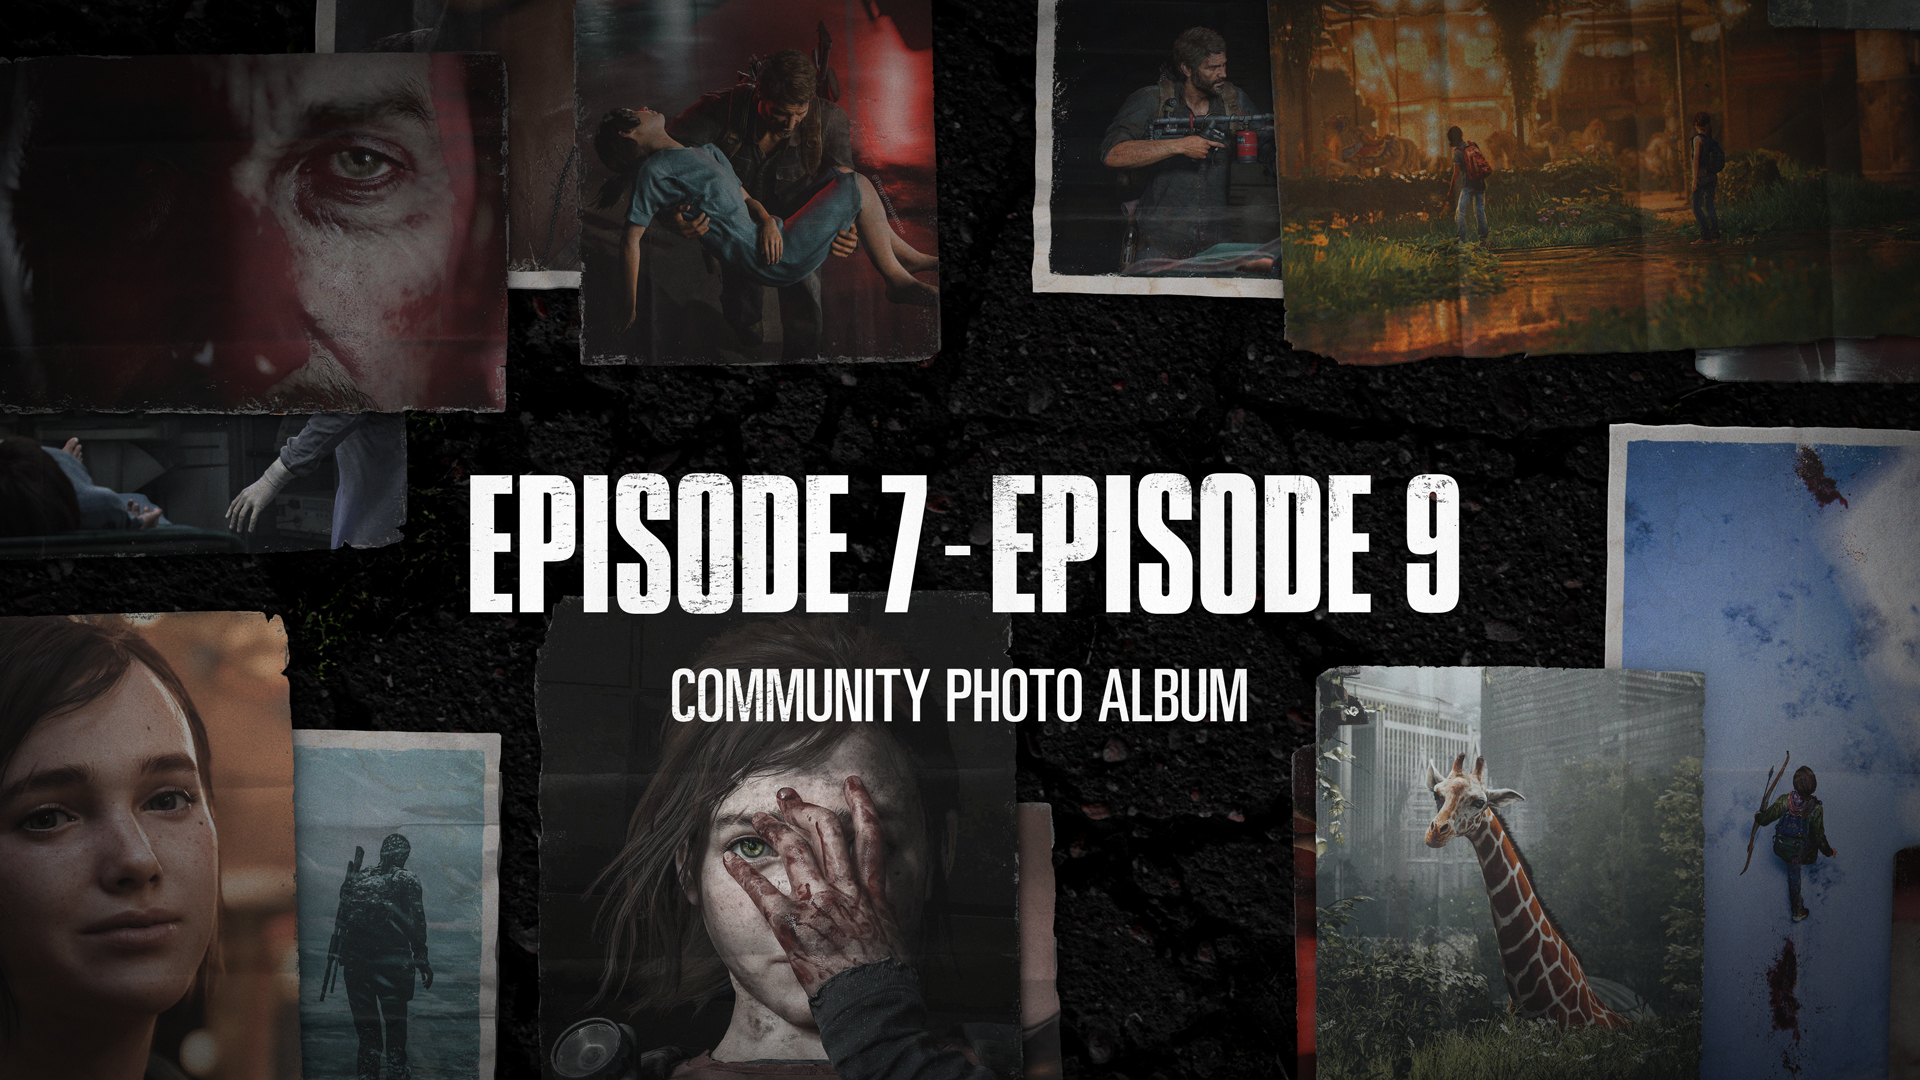 PHOTO MODE COLLECTION: THE LAST OF US EPISODES 7 - 9